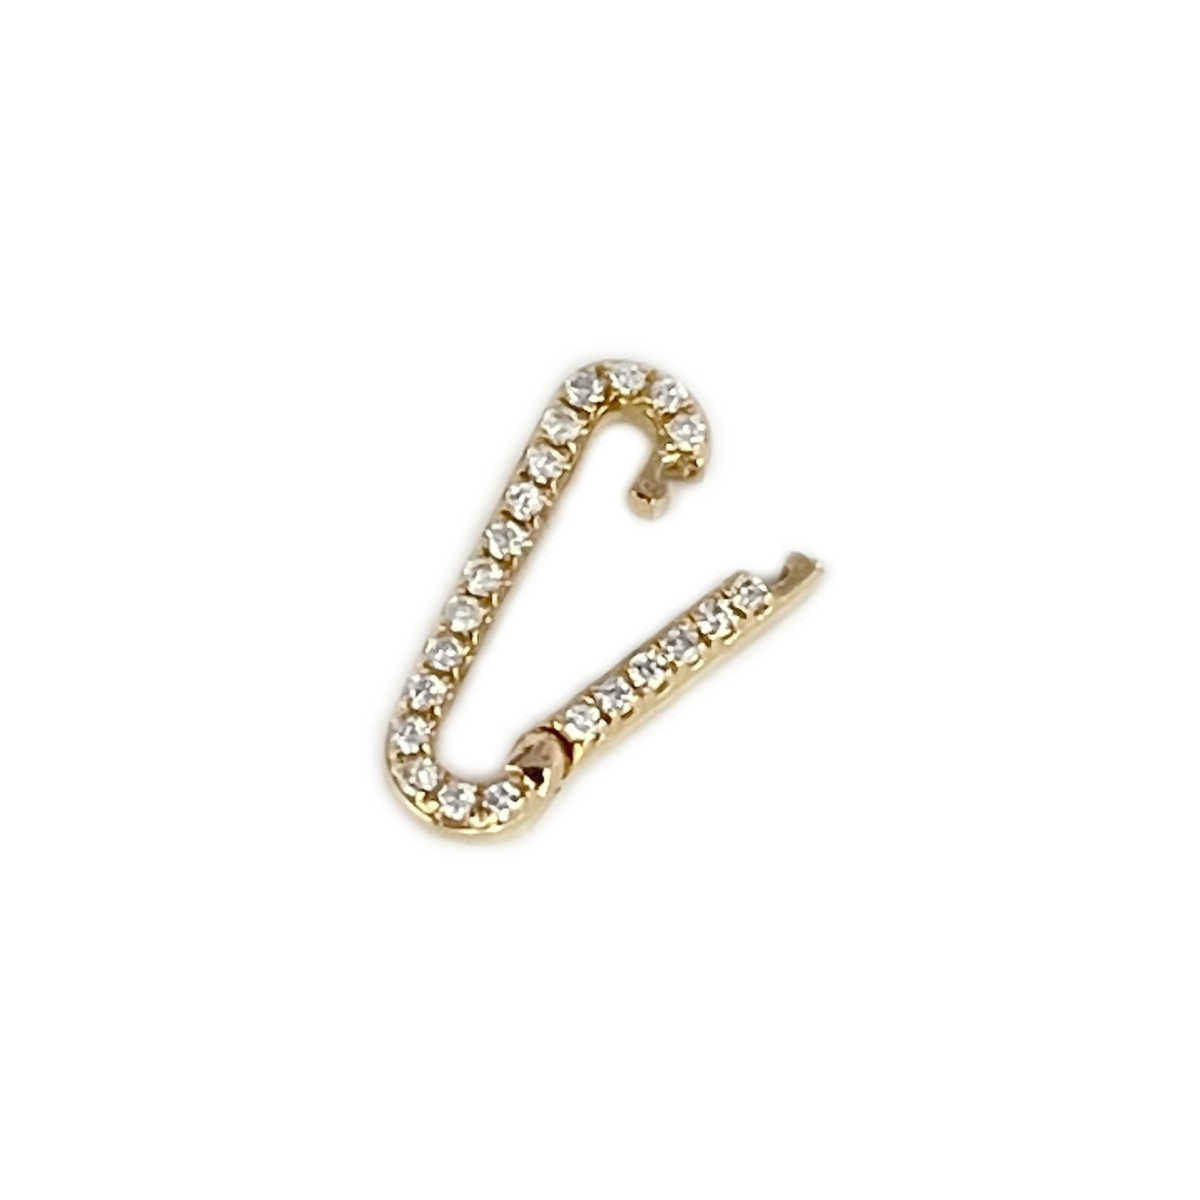 14k Gold Charm Holder with Diamonds for Medical Alert Bracelet, Necklace, Pendant | Multiple Charm Clip Connector | Charmed Medical Jewelry